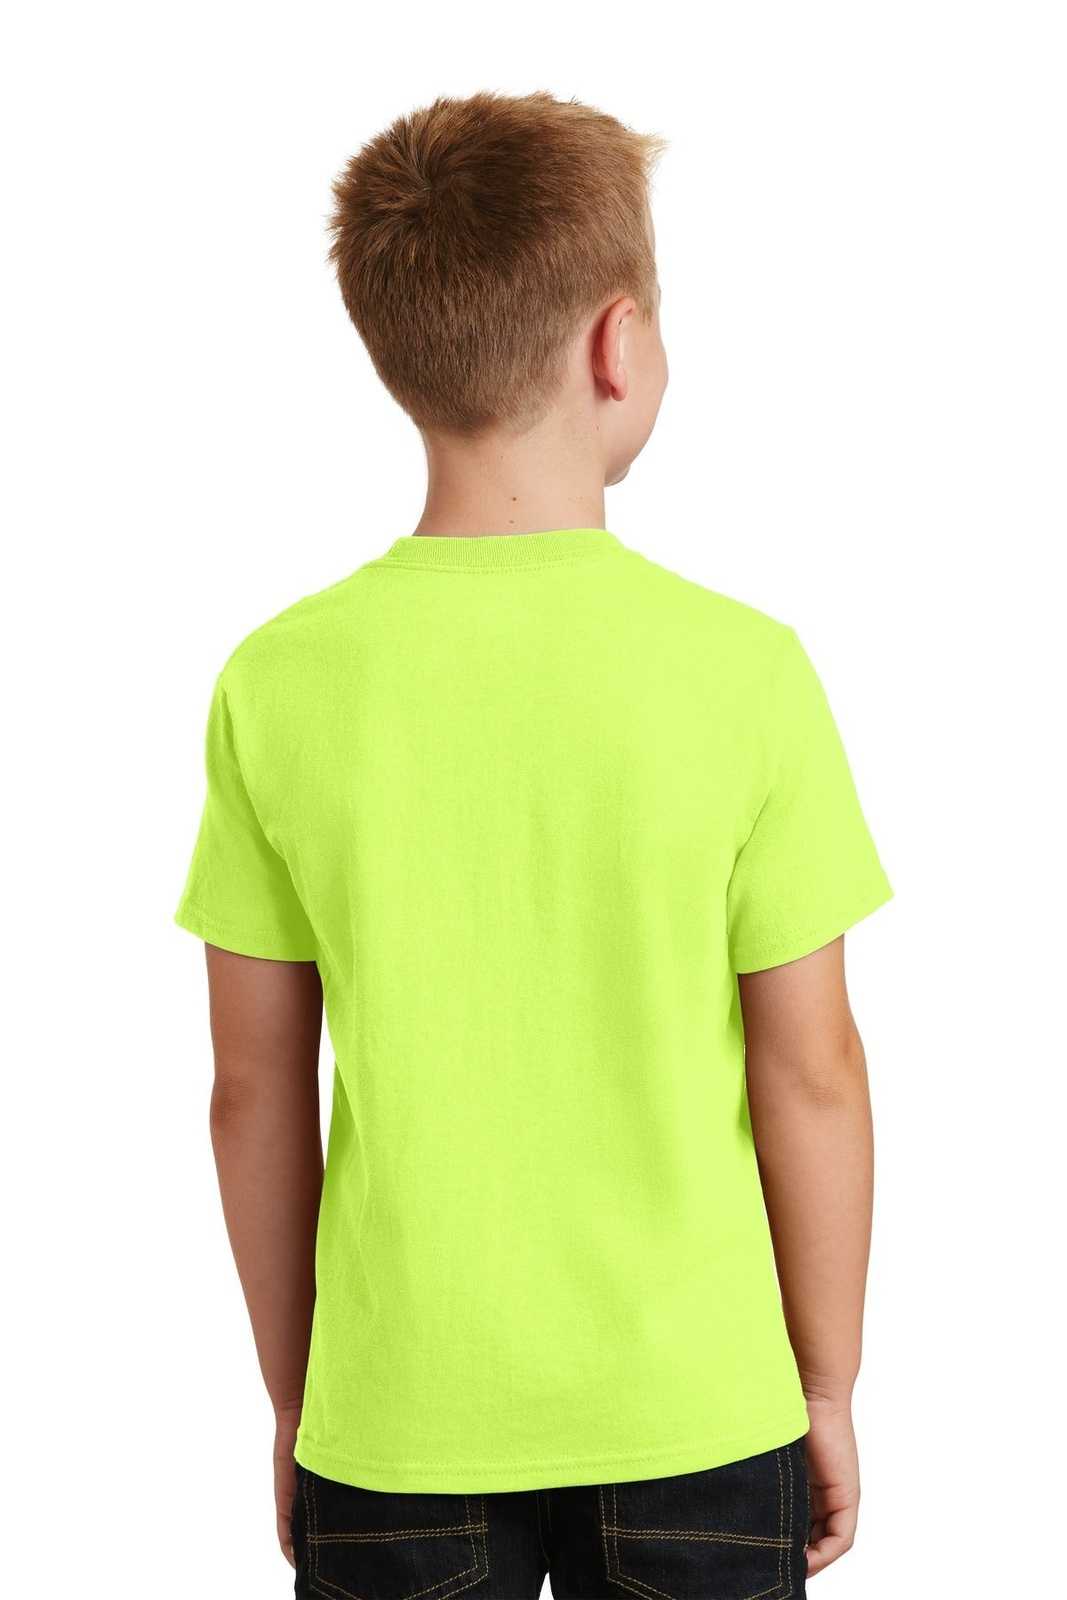 Port & Company PC54Y Youth Core Cotton Tee - Neon Yellow - HIT a Double - 1